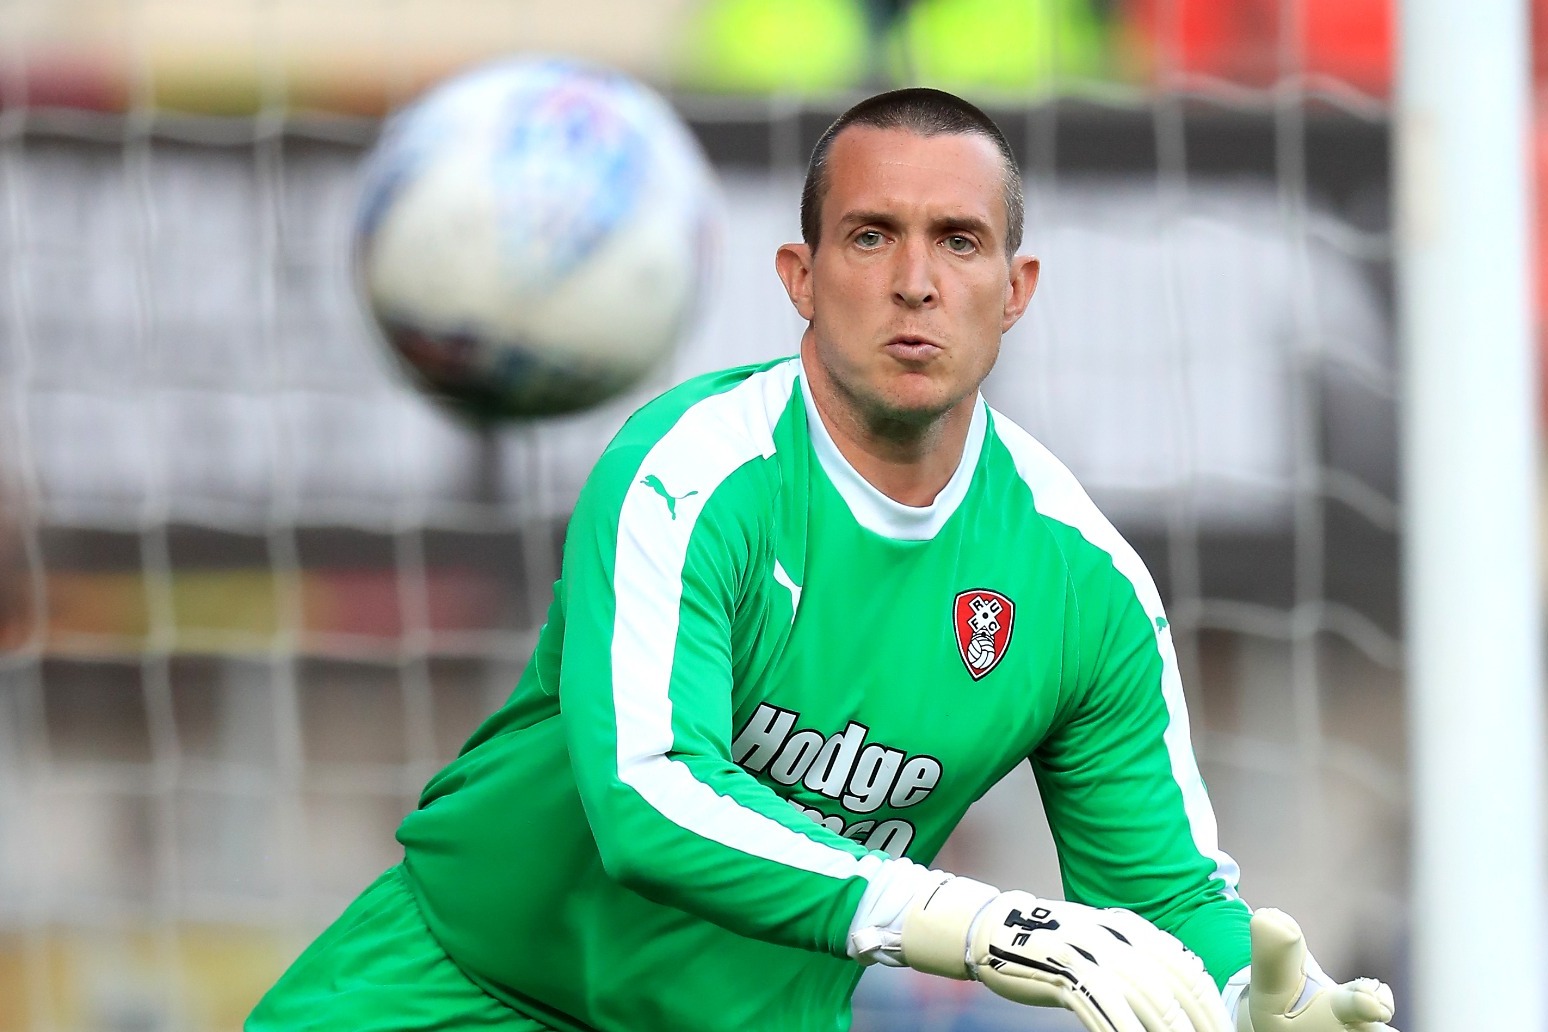 MK Dons goalkeeper coach Lewis Price diagnosed with testicular cancer 